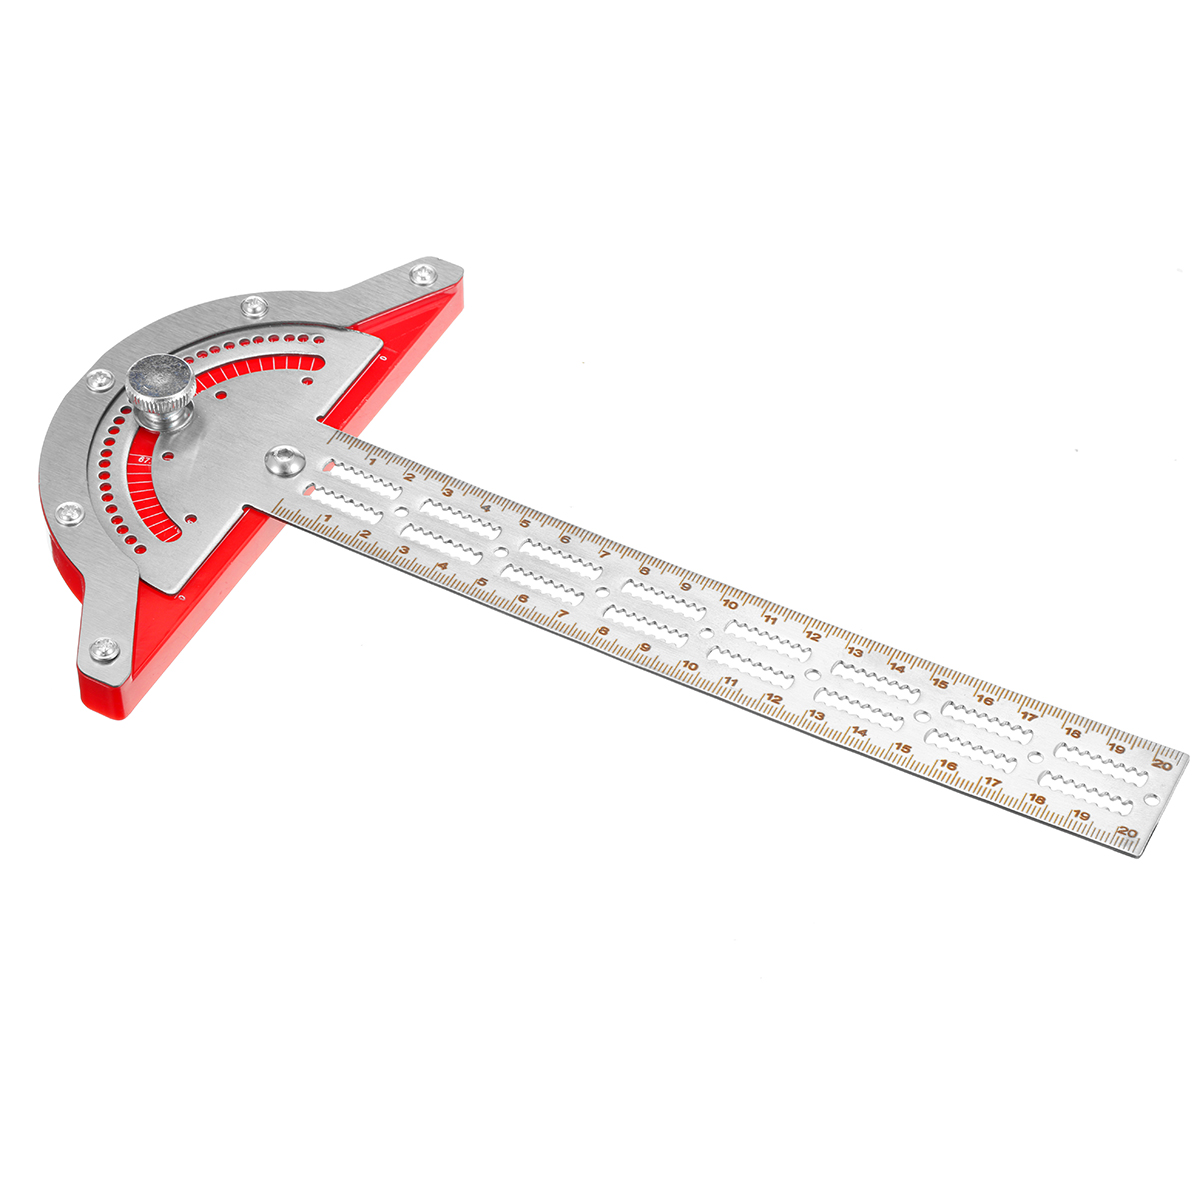 Stainless-Steel-Edge-Ruler-Protractor-Woodworking-Ruler-Angle-Measuring-Tool-Precision-Carpenter-Too-1923789-2